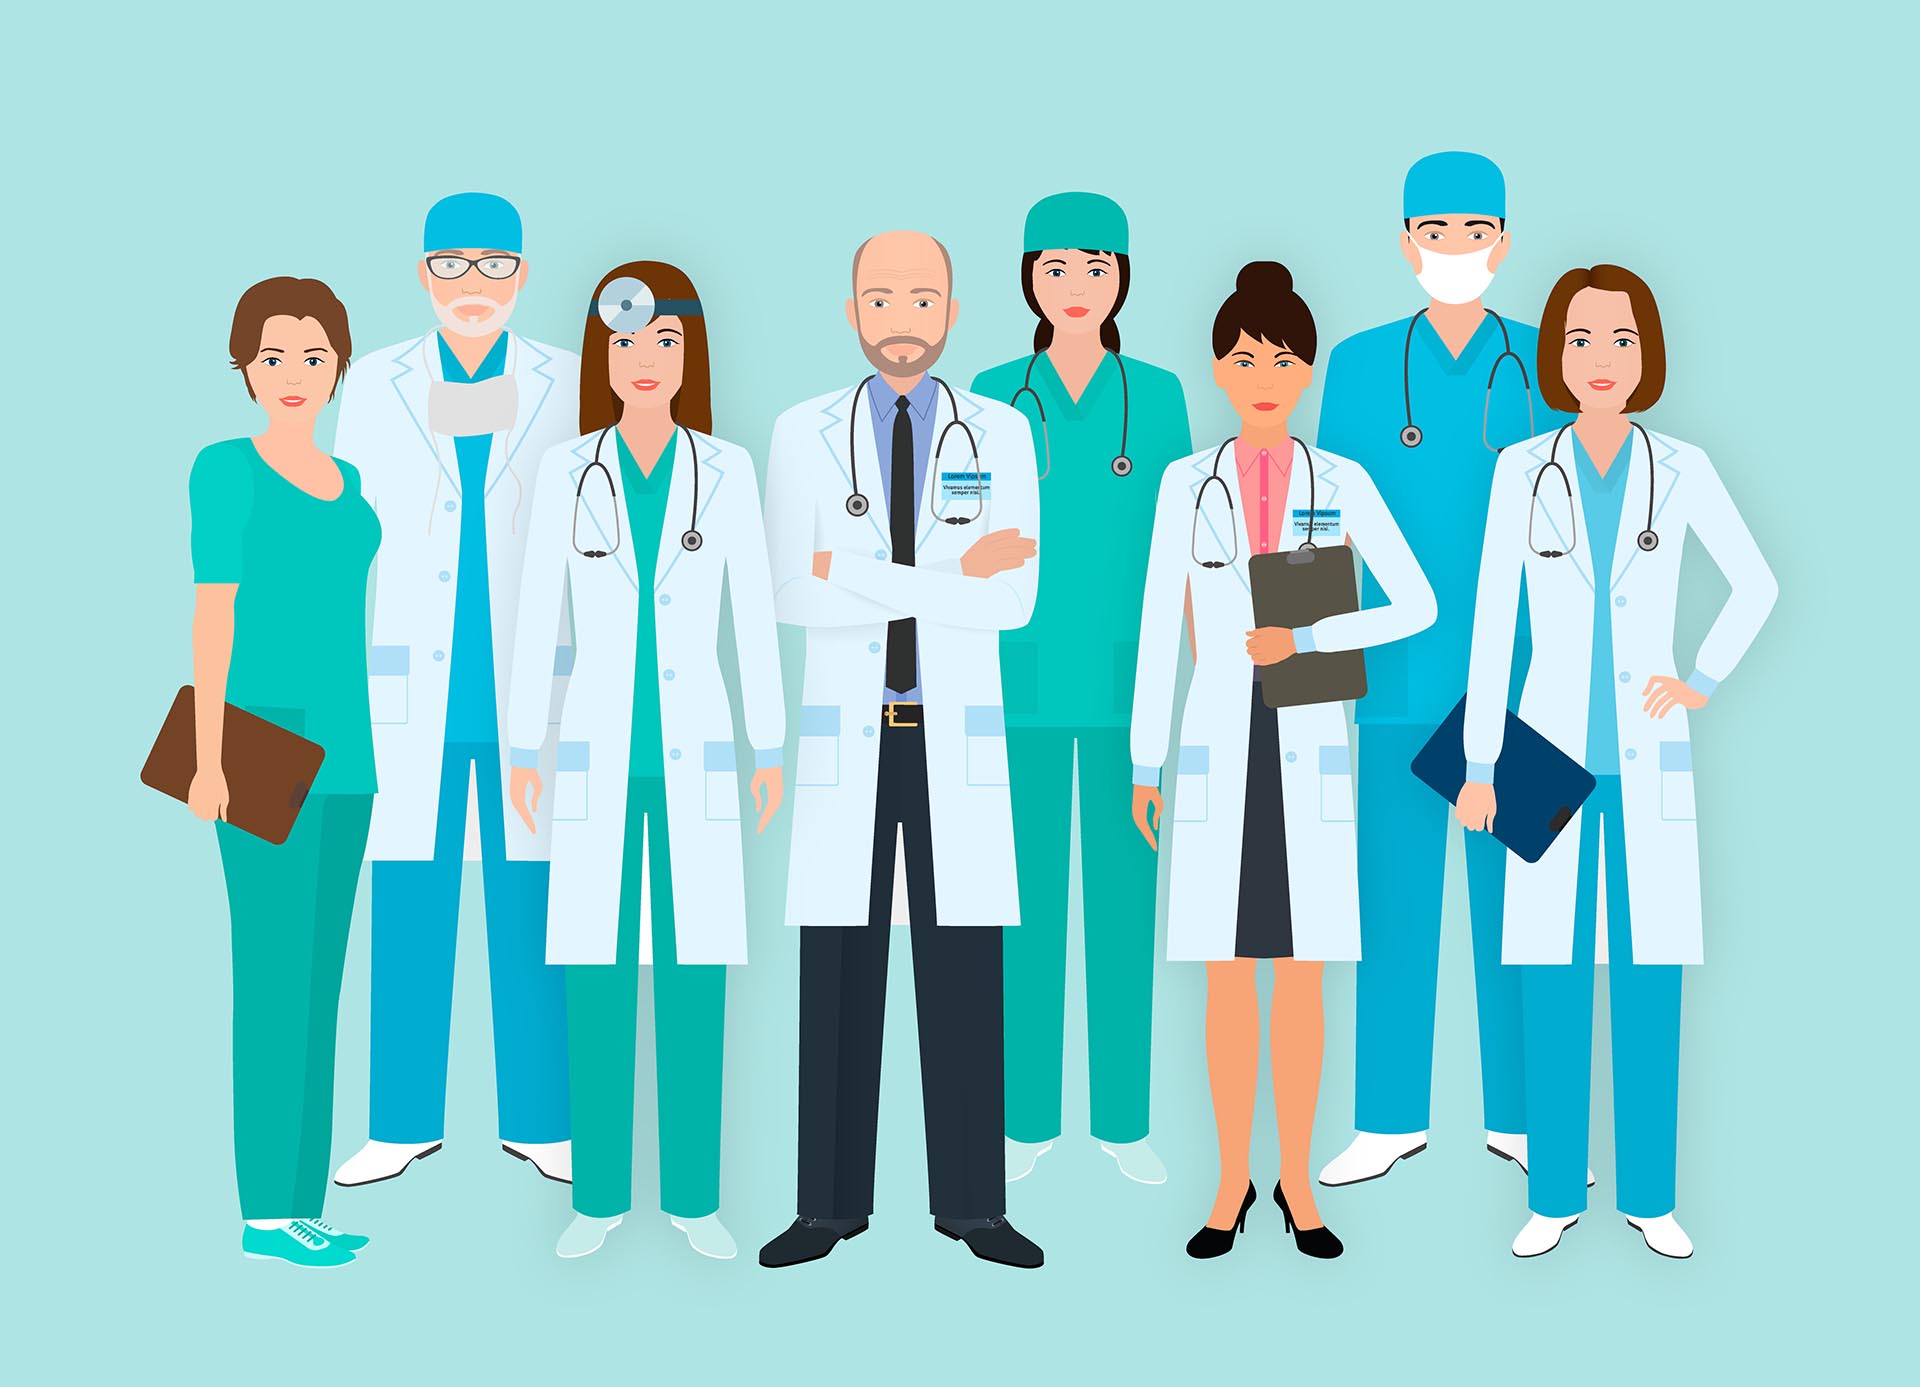 Hospital staff. Group of eight men and women doctors and nurses characters standing together. Medical people. Flat style vector illustration.